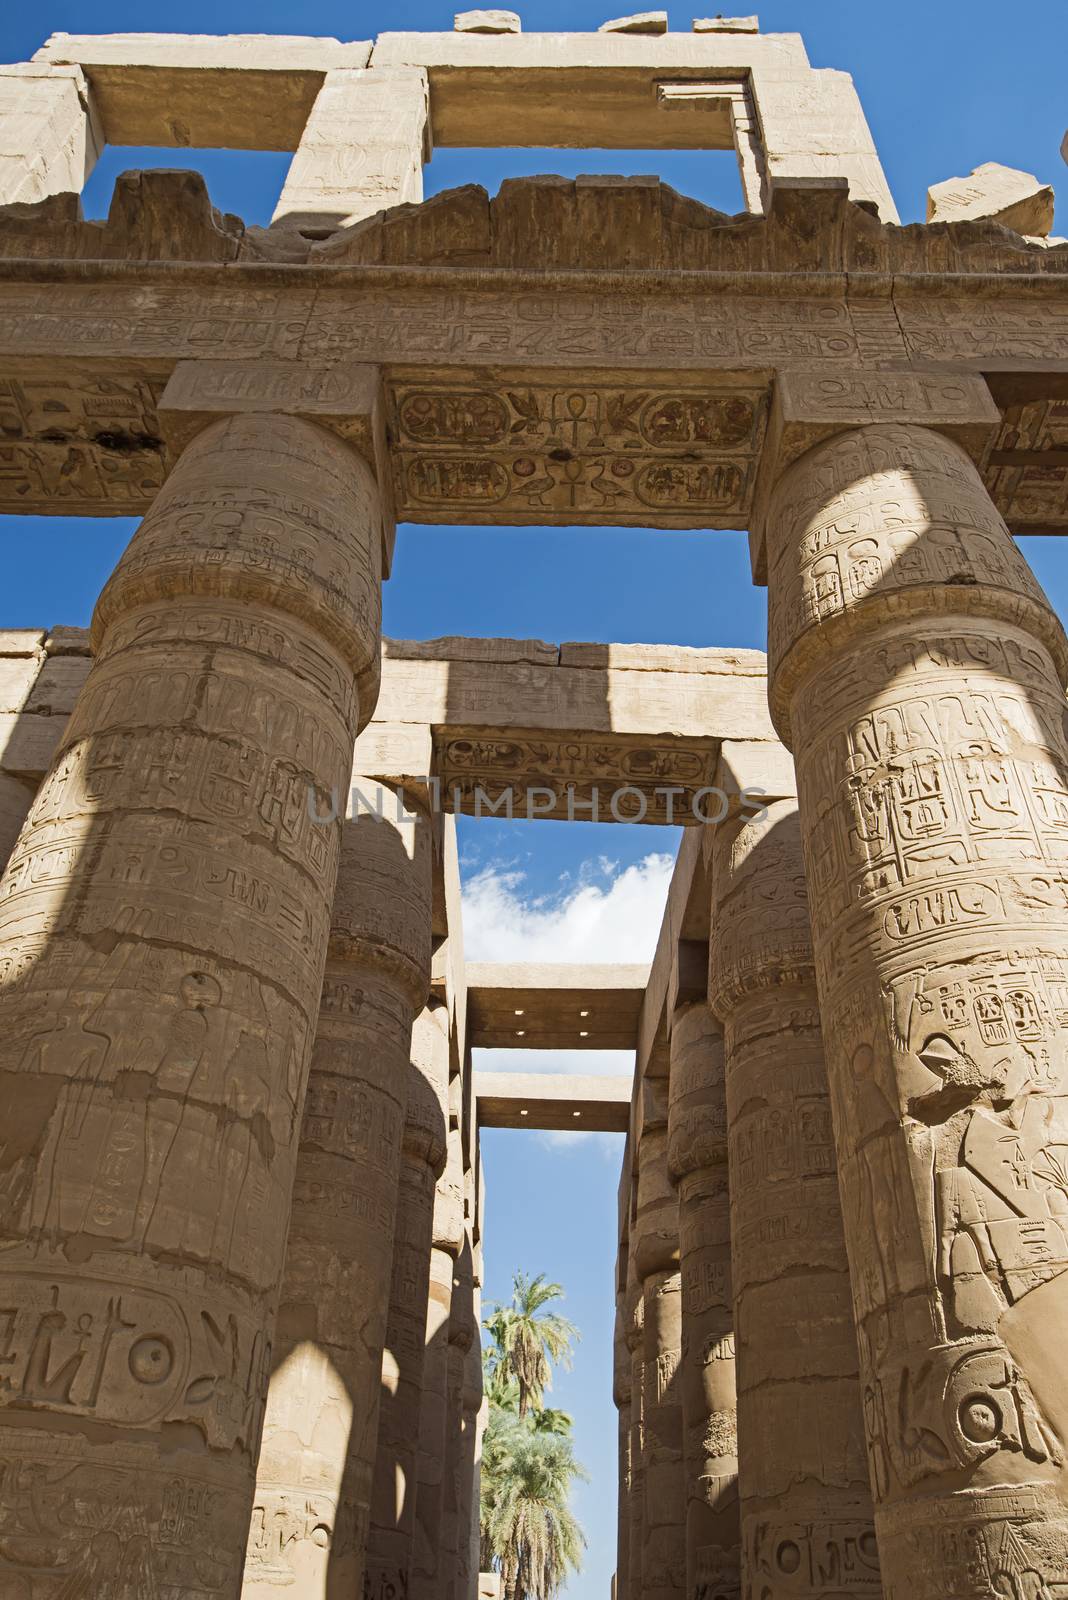 Columns with hieroglyphic carvings and paintings in hypostyle hall at anciant egyptian Karnak Temple in Luxor